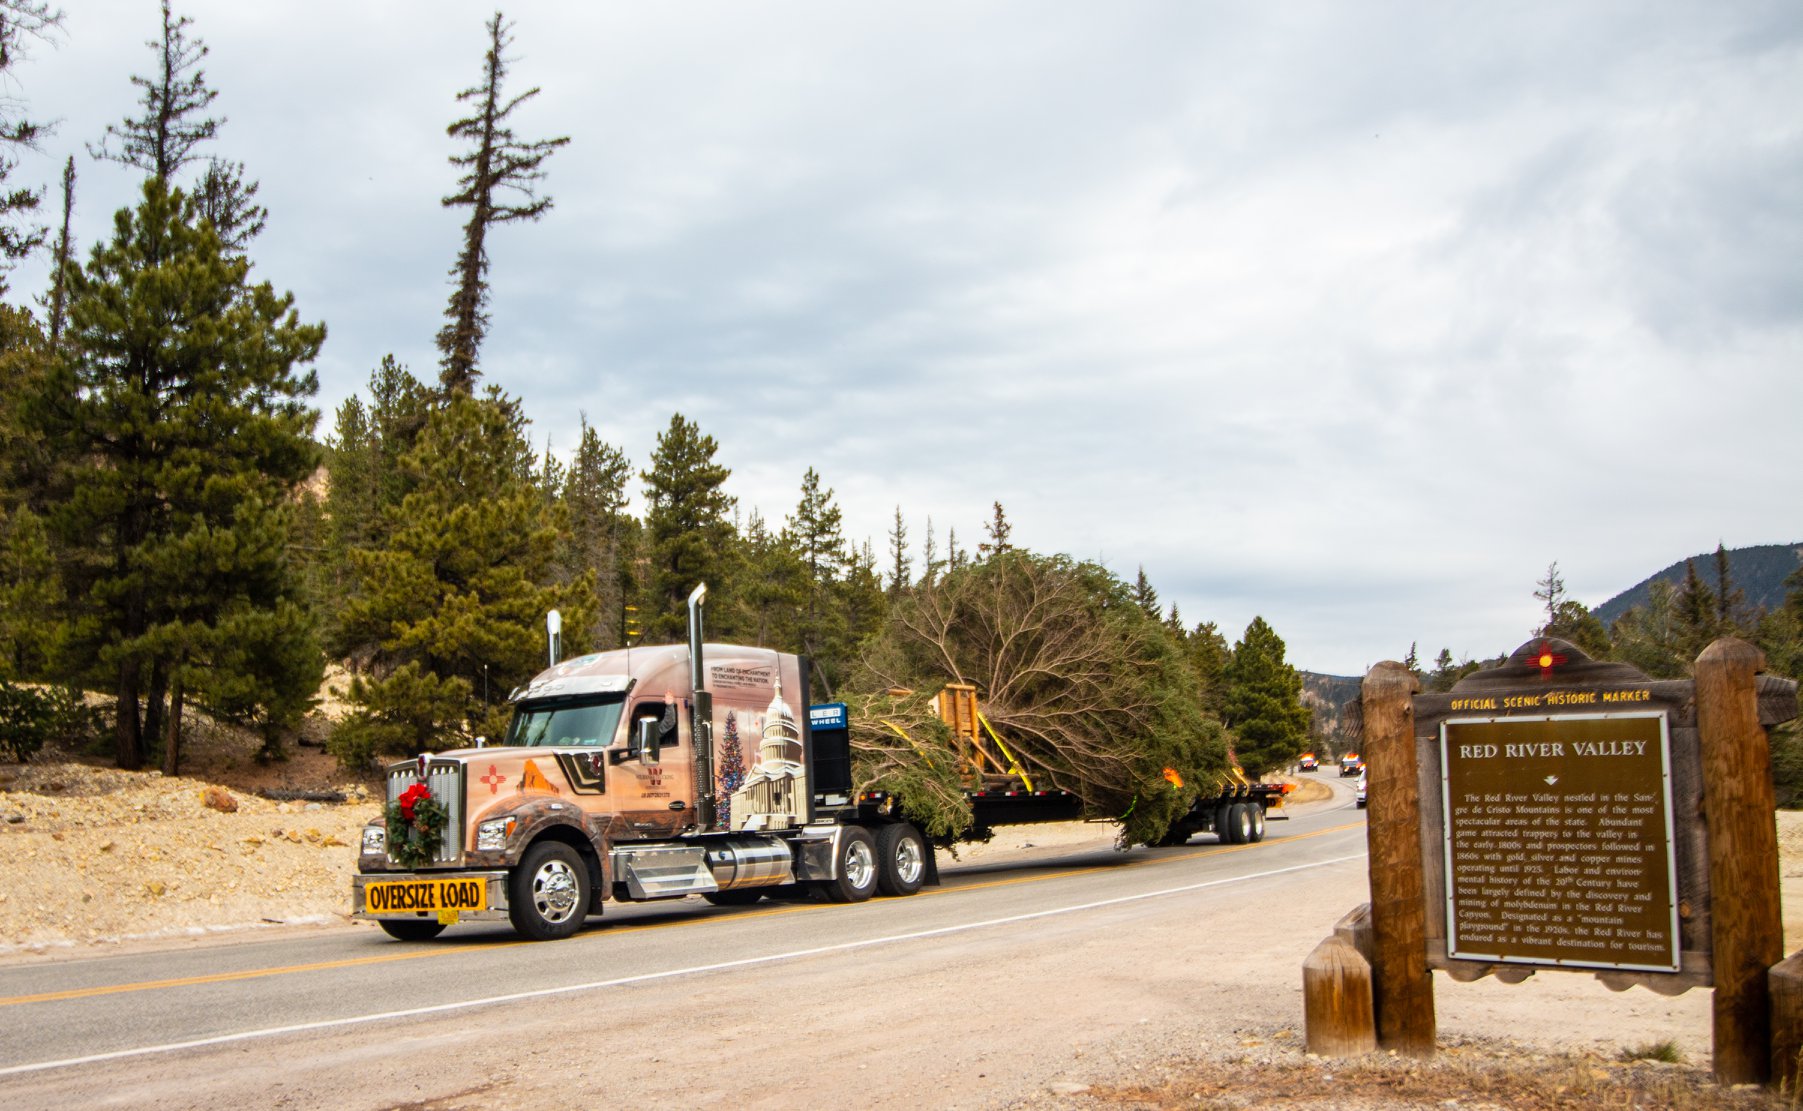 The 2019 Capitol Christmas Tree came from the Red River Valley in Carson National Forest. Photo credit James Edward Mills.